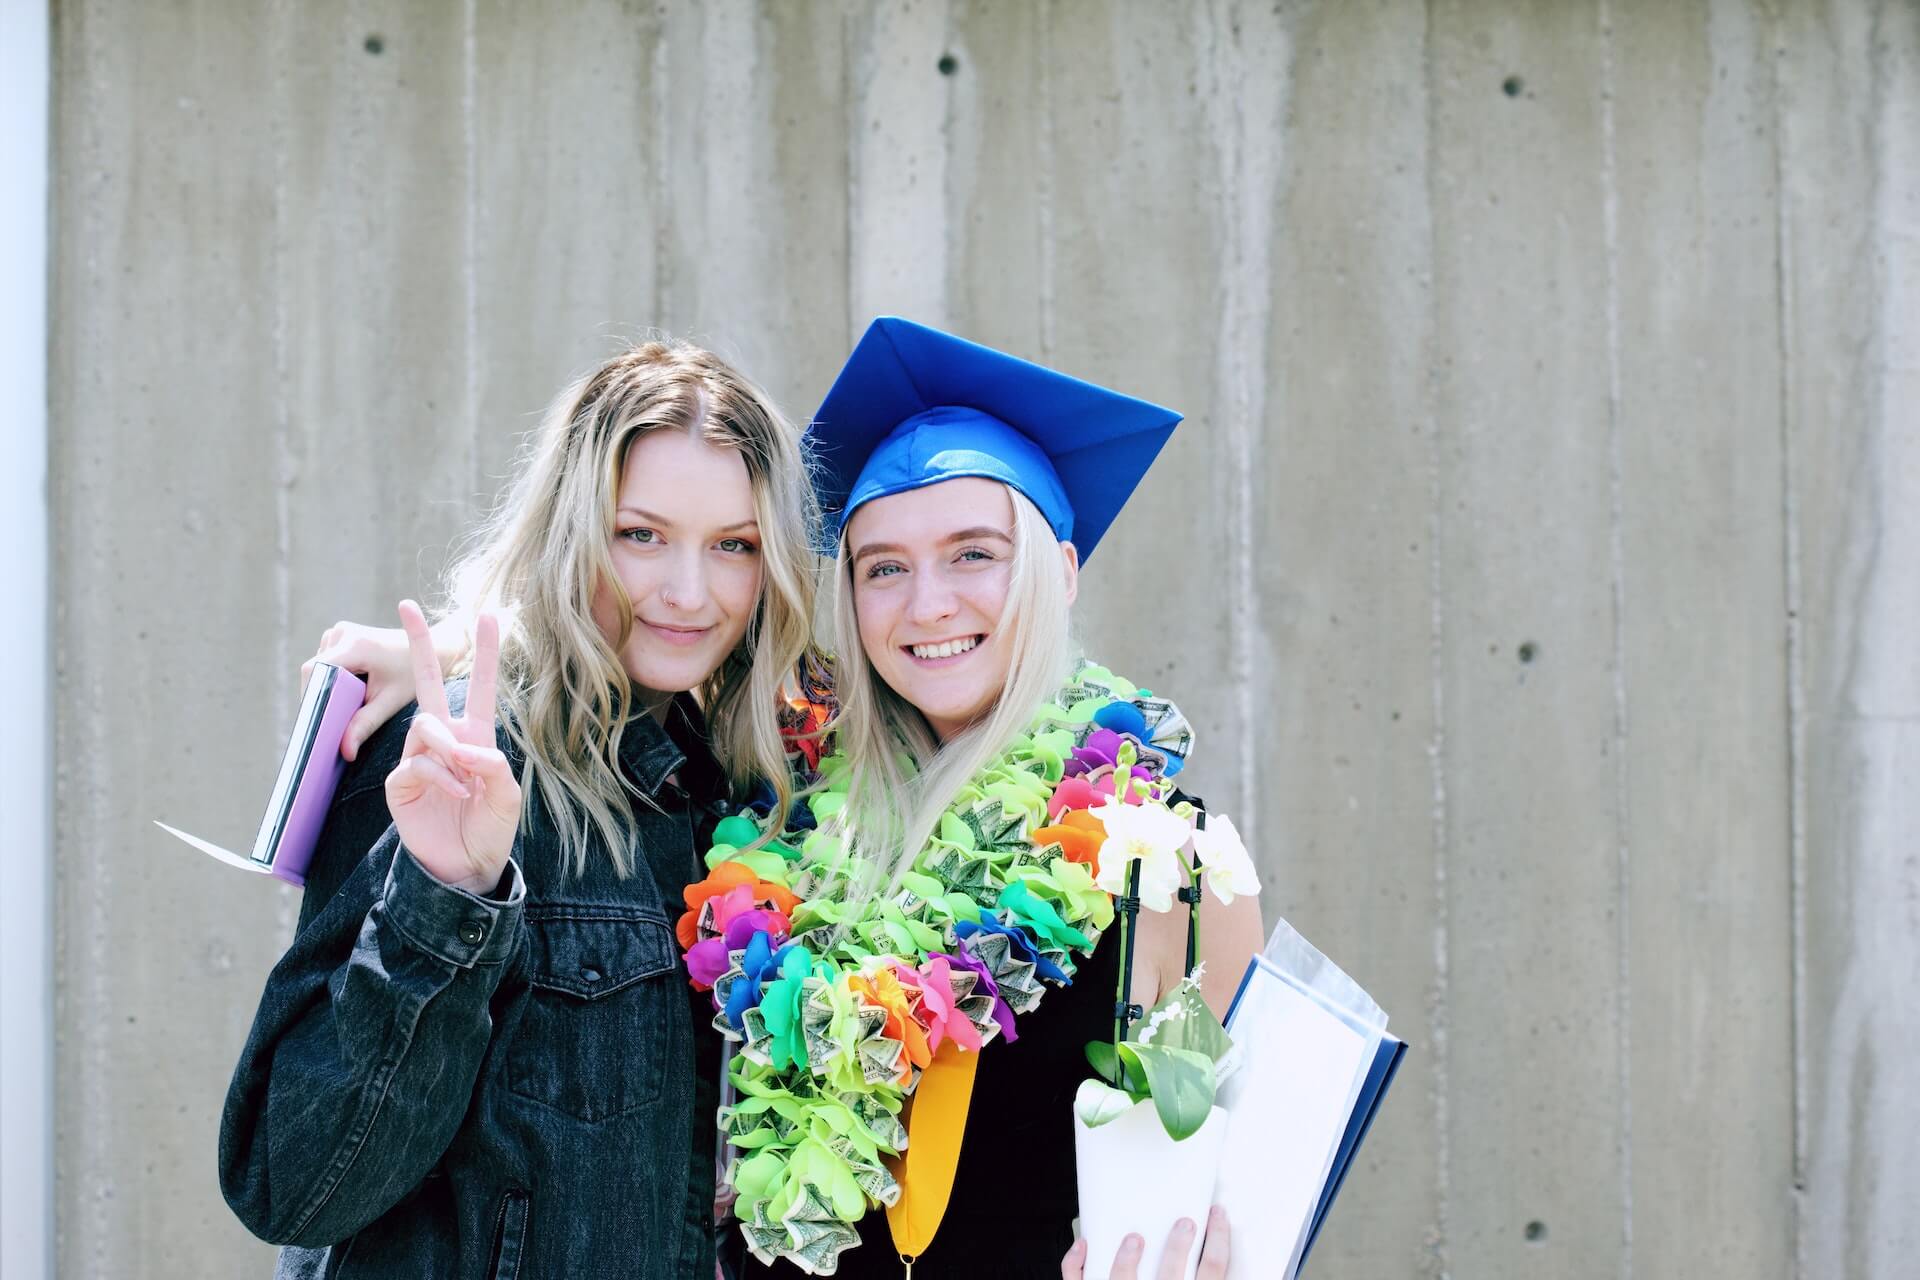 8 Simple Tips on How to Get Your Teenager Ready for College